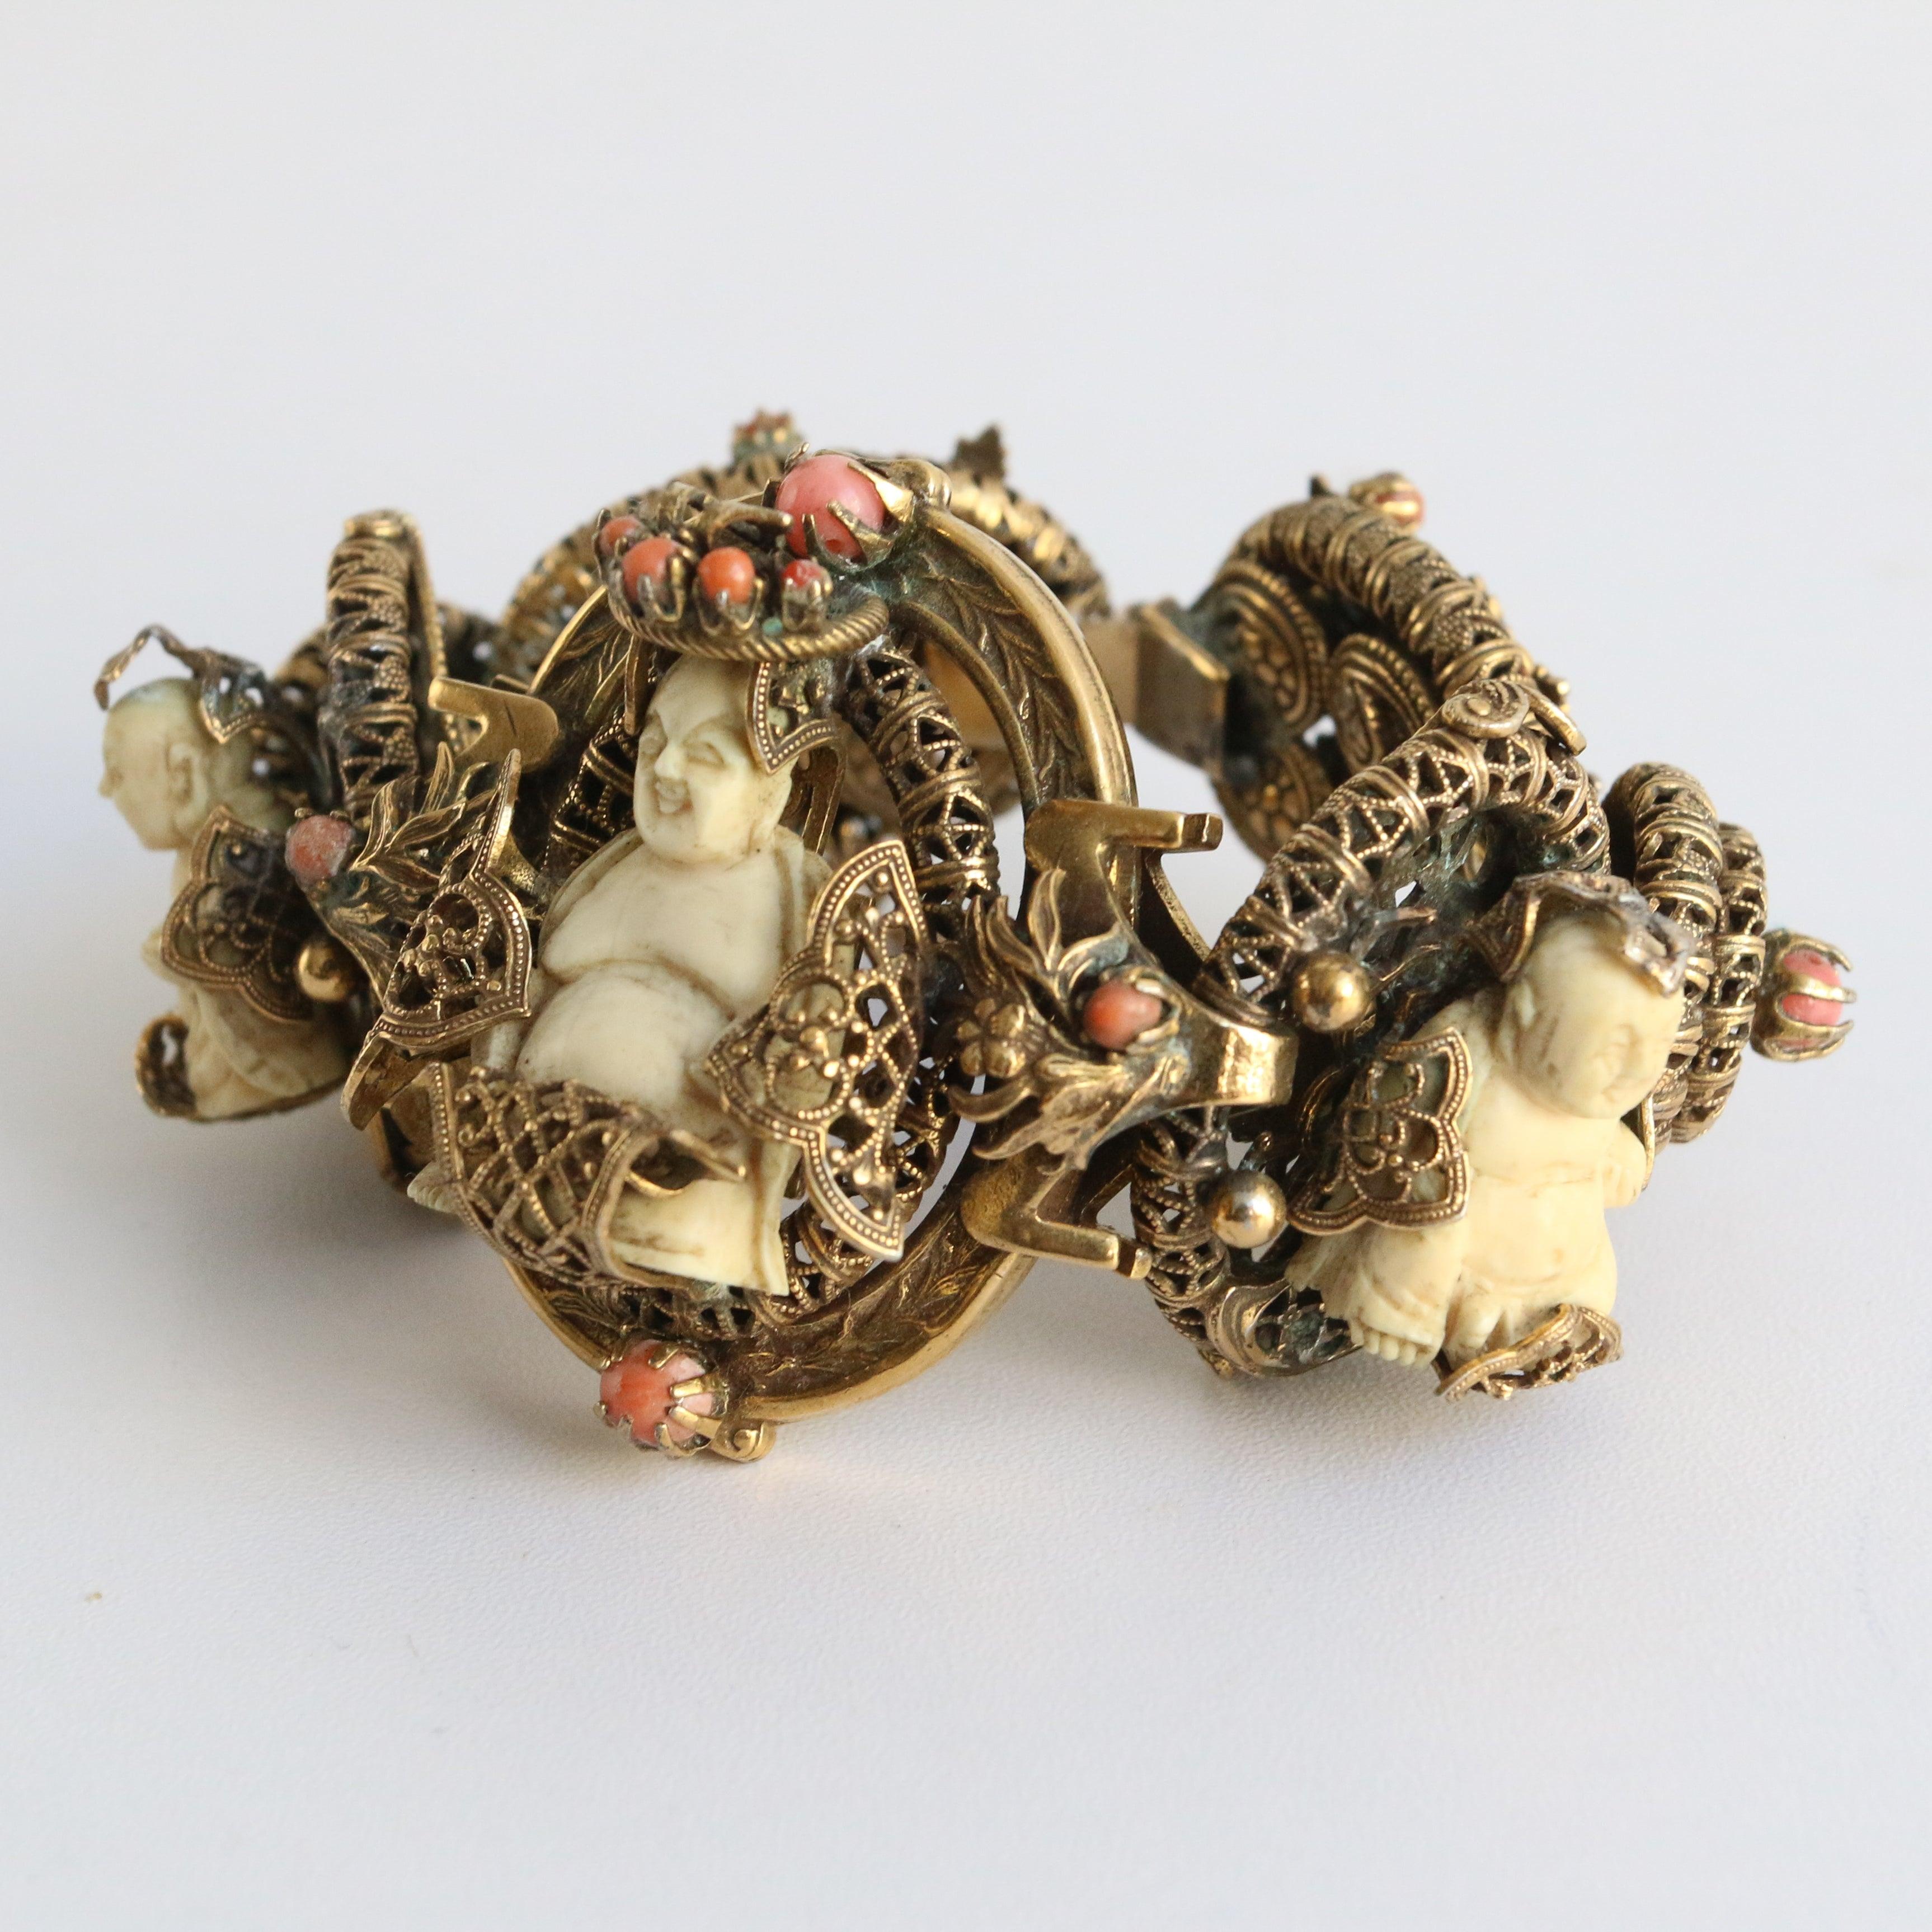 This truly mesmerising 1920's Filigree brass bracelet, adorned with claw set angel skin coral and carved bovine Buddhas, in a Trikaya setting, is a rare piece to behold. The five linked bases are ornately decorated in filigree motifs and designs,